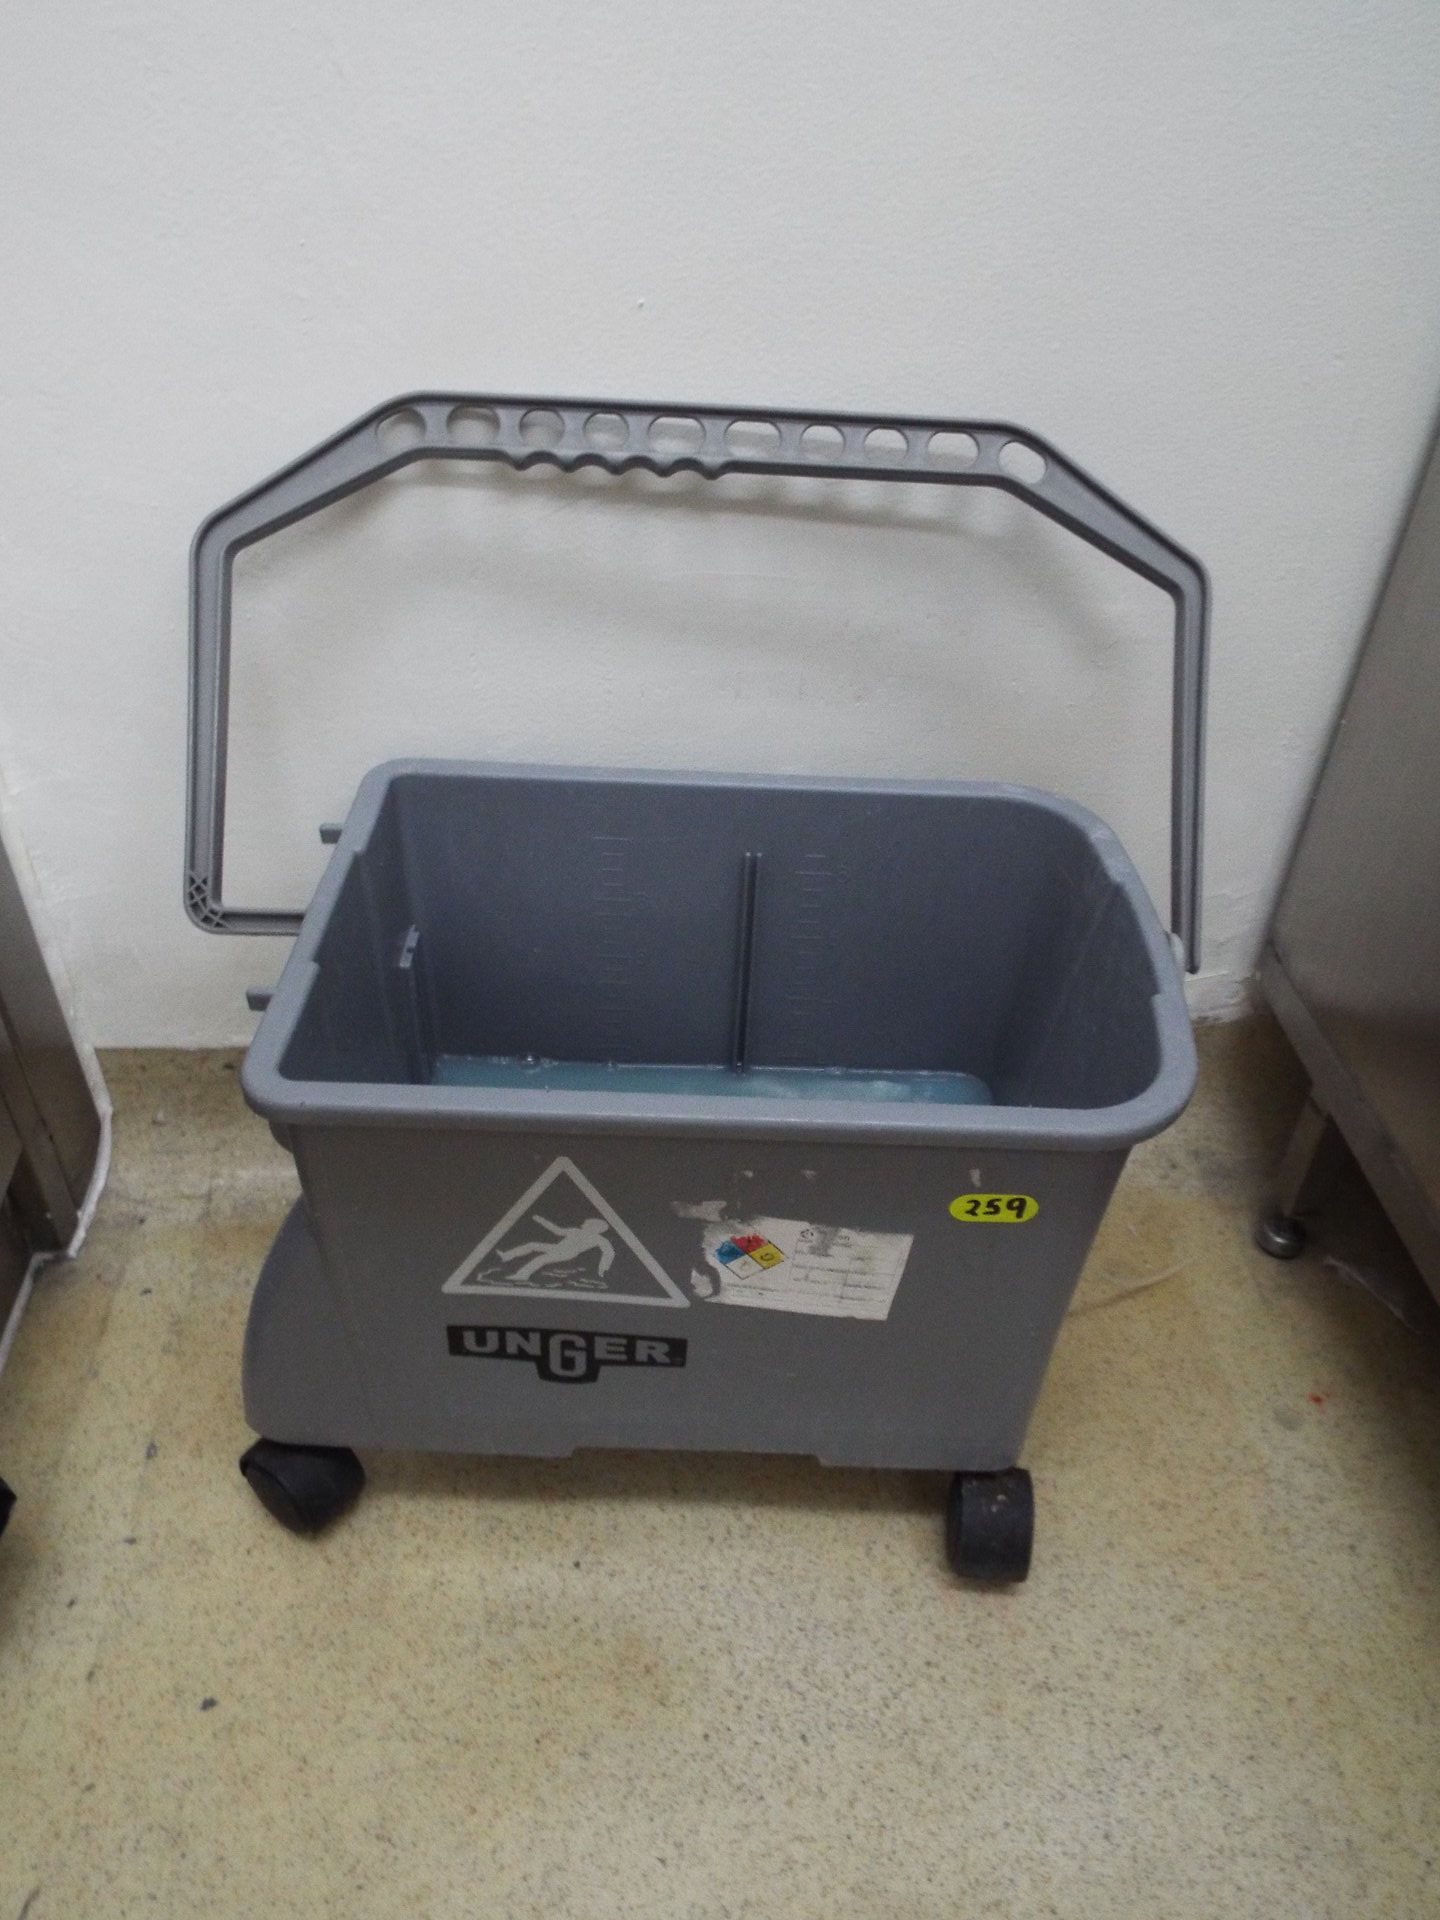 (5) Unger plastic carts for cleaning